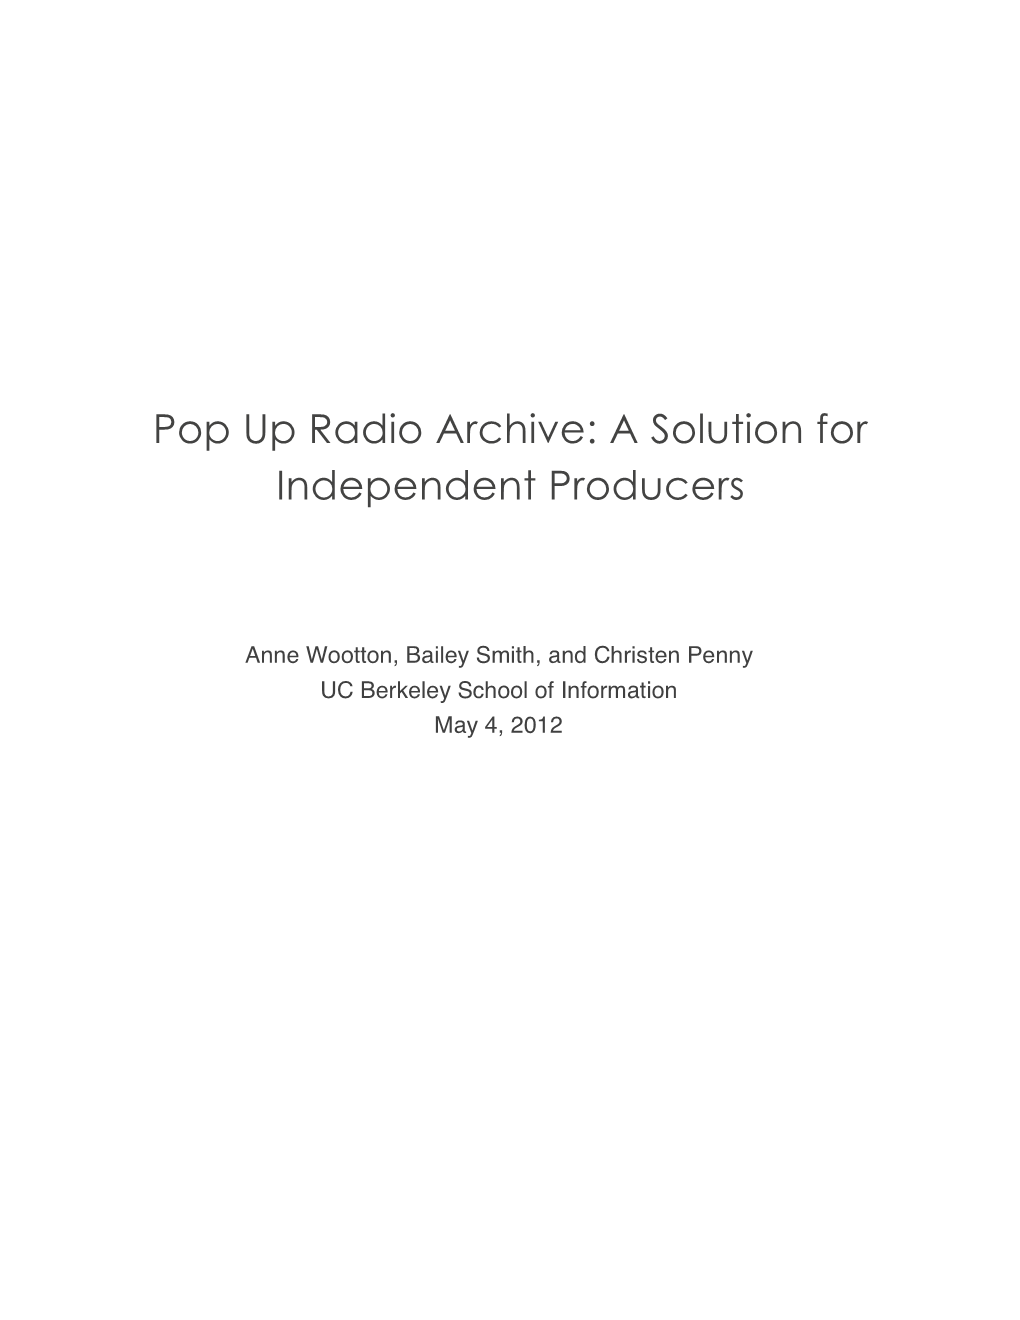 Pop up Radio Archive: a Solution for Independent Producers